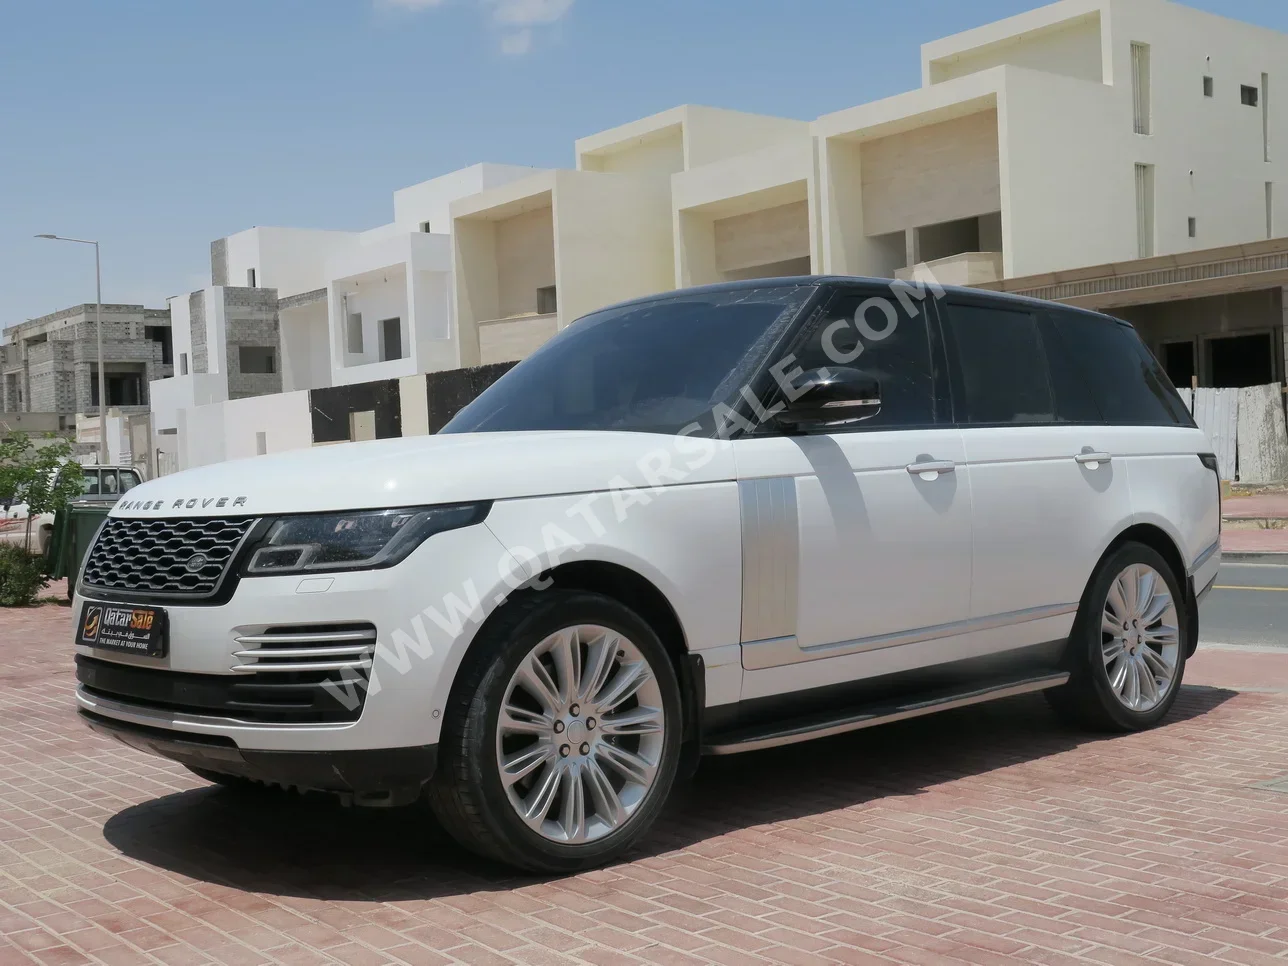 Land Rover  Range Rover  Vogue SE  2020  Automatic  70,000 Km  8 Cylinder  Four Wheel Drive (4WD)  SUV  White  With Warranty